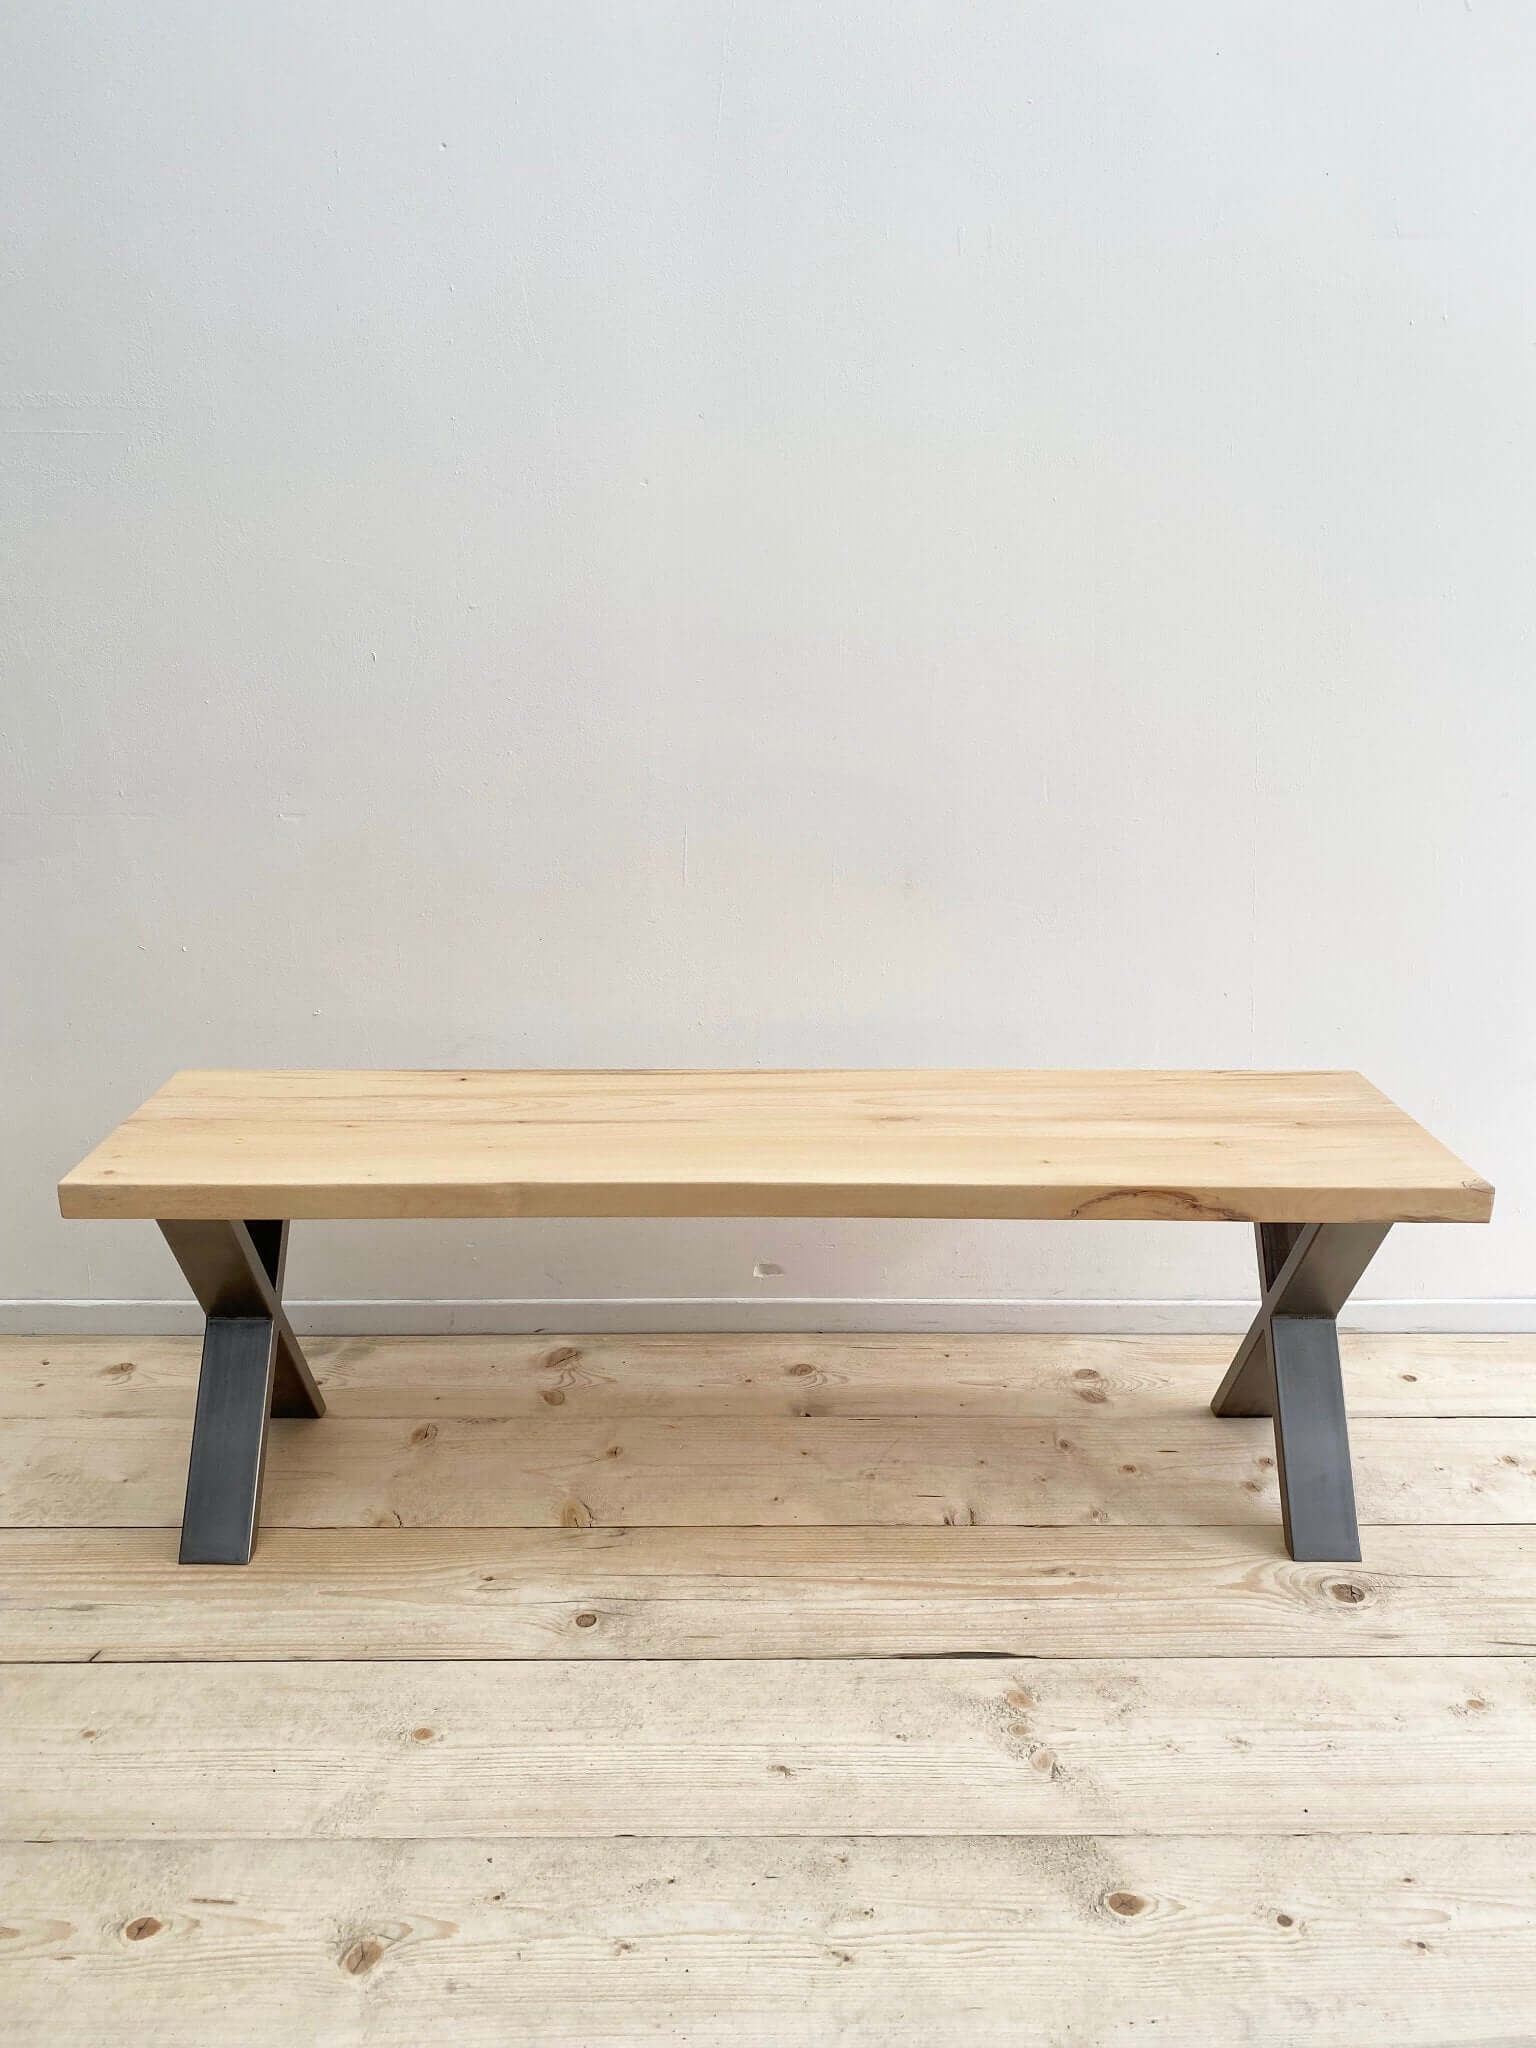 Hardwood bench seat with industrial legs.